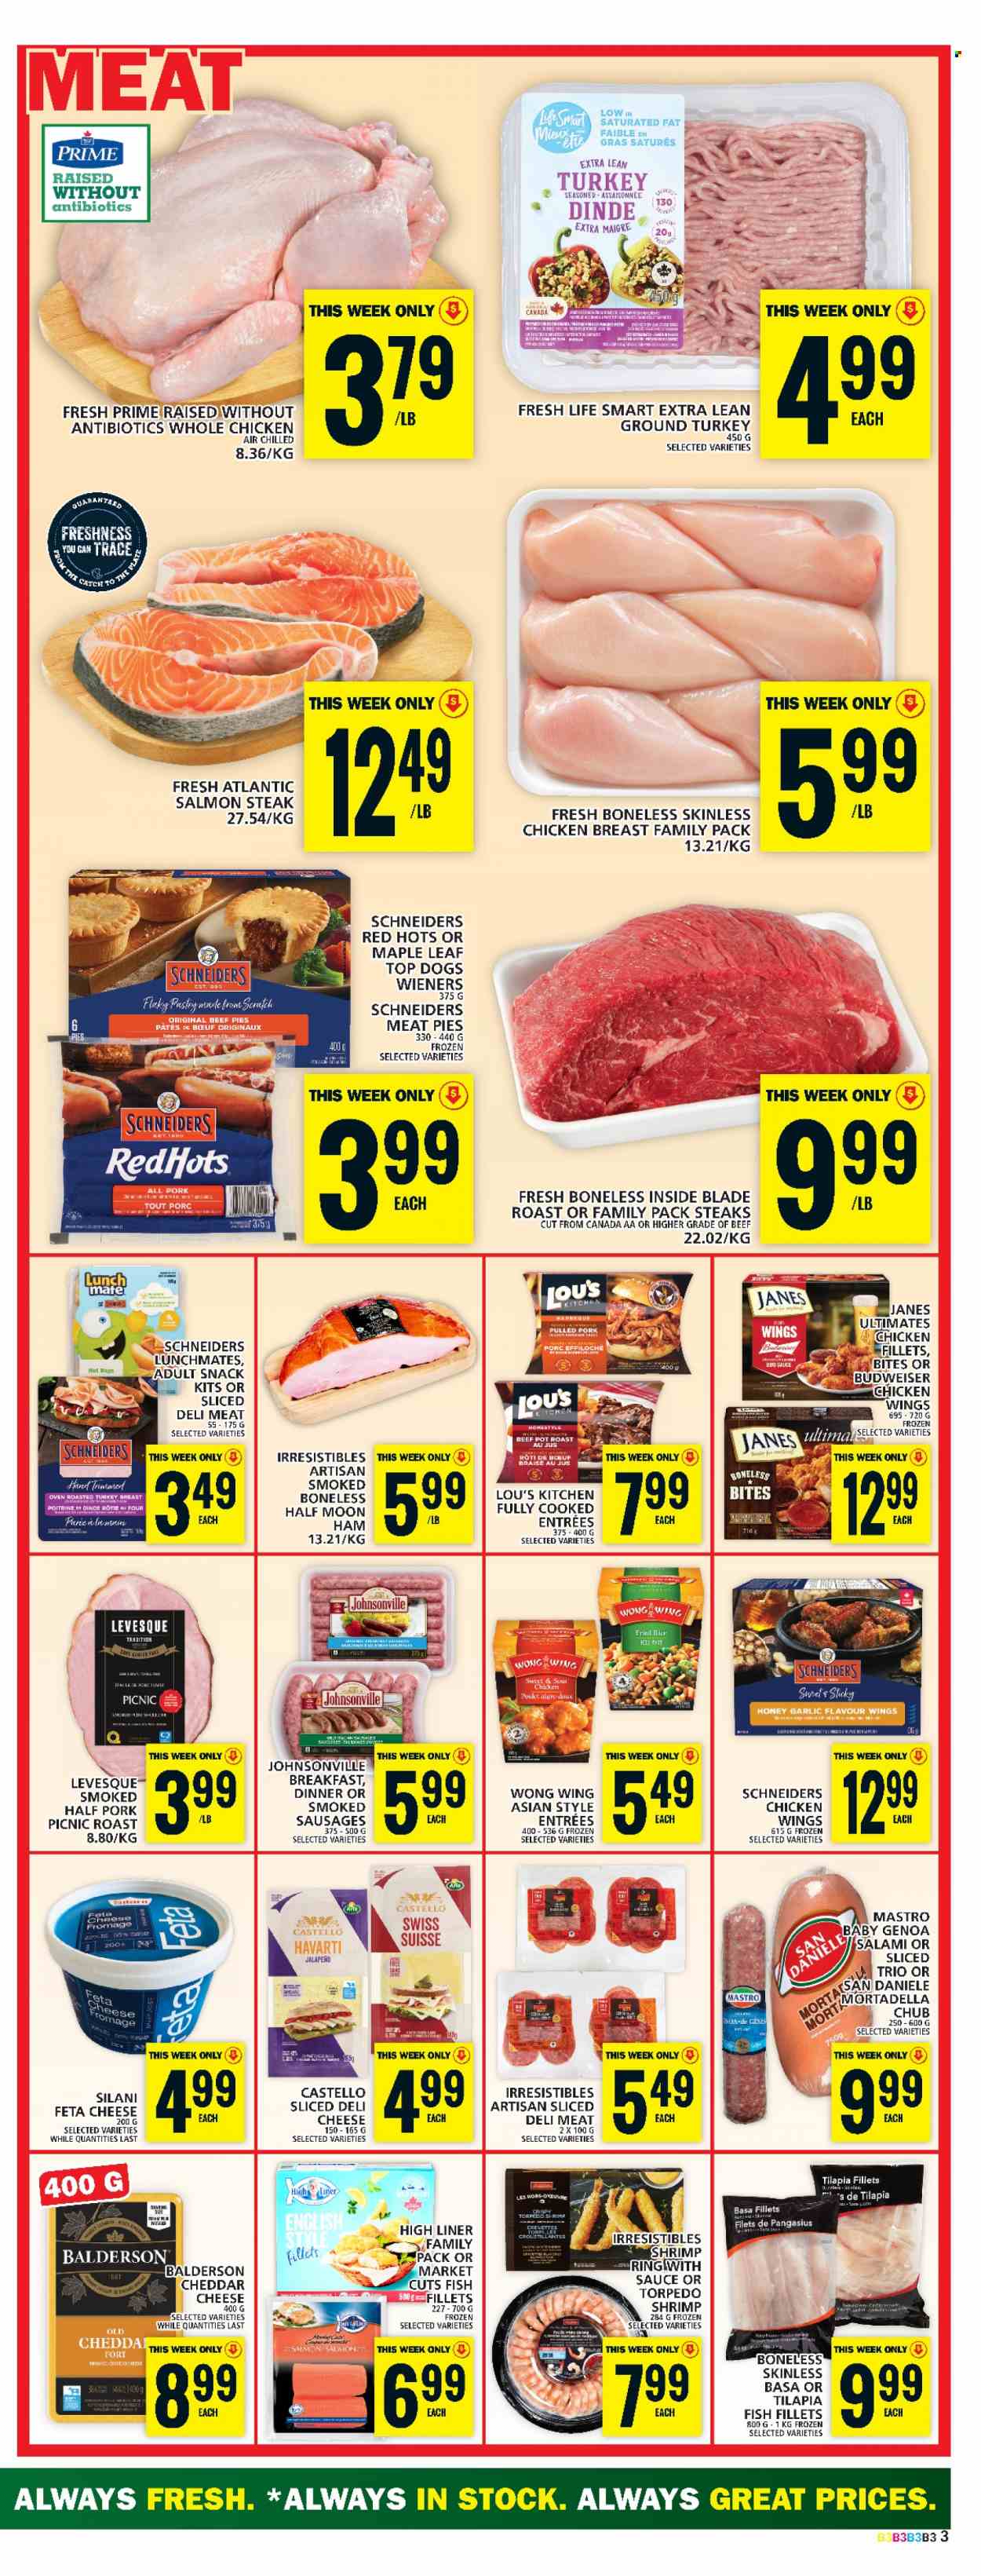 thumbnail - Food Basics Flyer - March 16, 2023 - March 22, 2023 - Sales products - fish fillets, salmon, tilapia, pangasius, fish, shrimps, beef pie, pulled pork, roast, salami, ham, Johnsonville, sausage, Havarti, cheddar, cheese, feta, chicken wings, snack, honey, beer, ground turkey, whole chicken, chicken breasts, chicken, turkey, steak, pork meat, pot, Budweiser. Page 4.